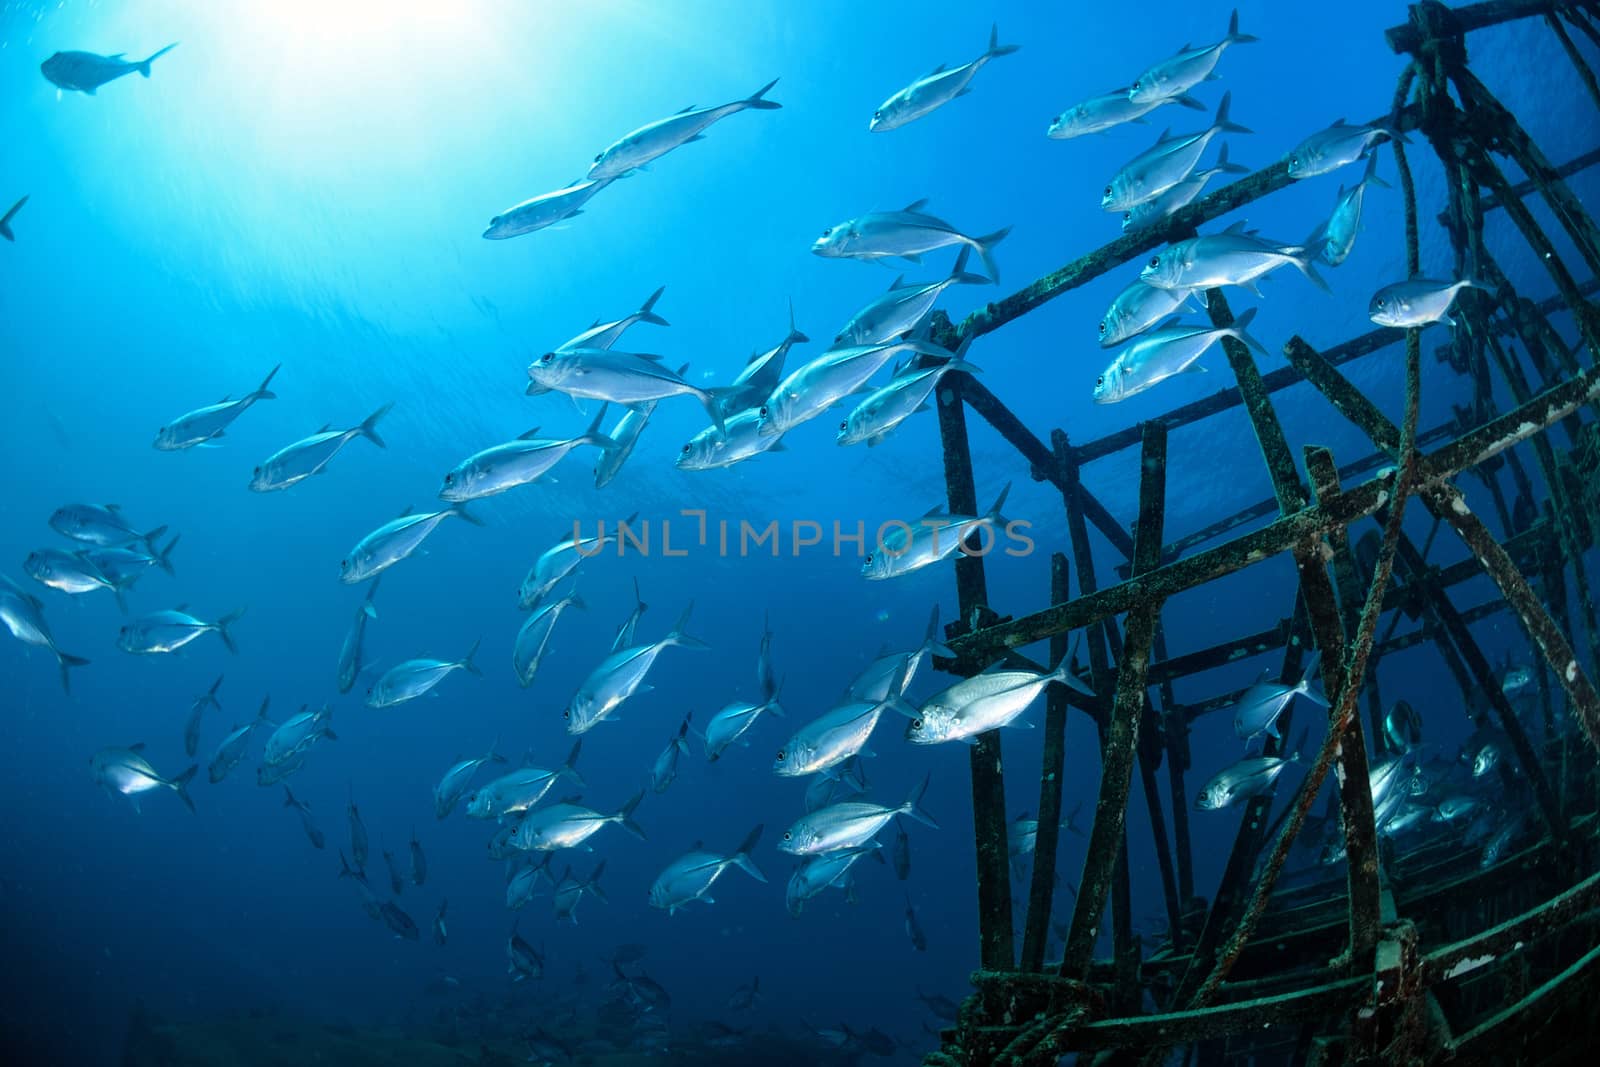 School of jackfish on artificial reef in Mabul, kapalai, Malaysi by think4photop